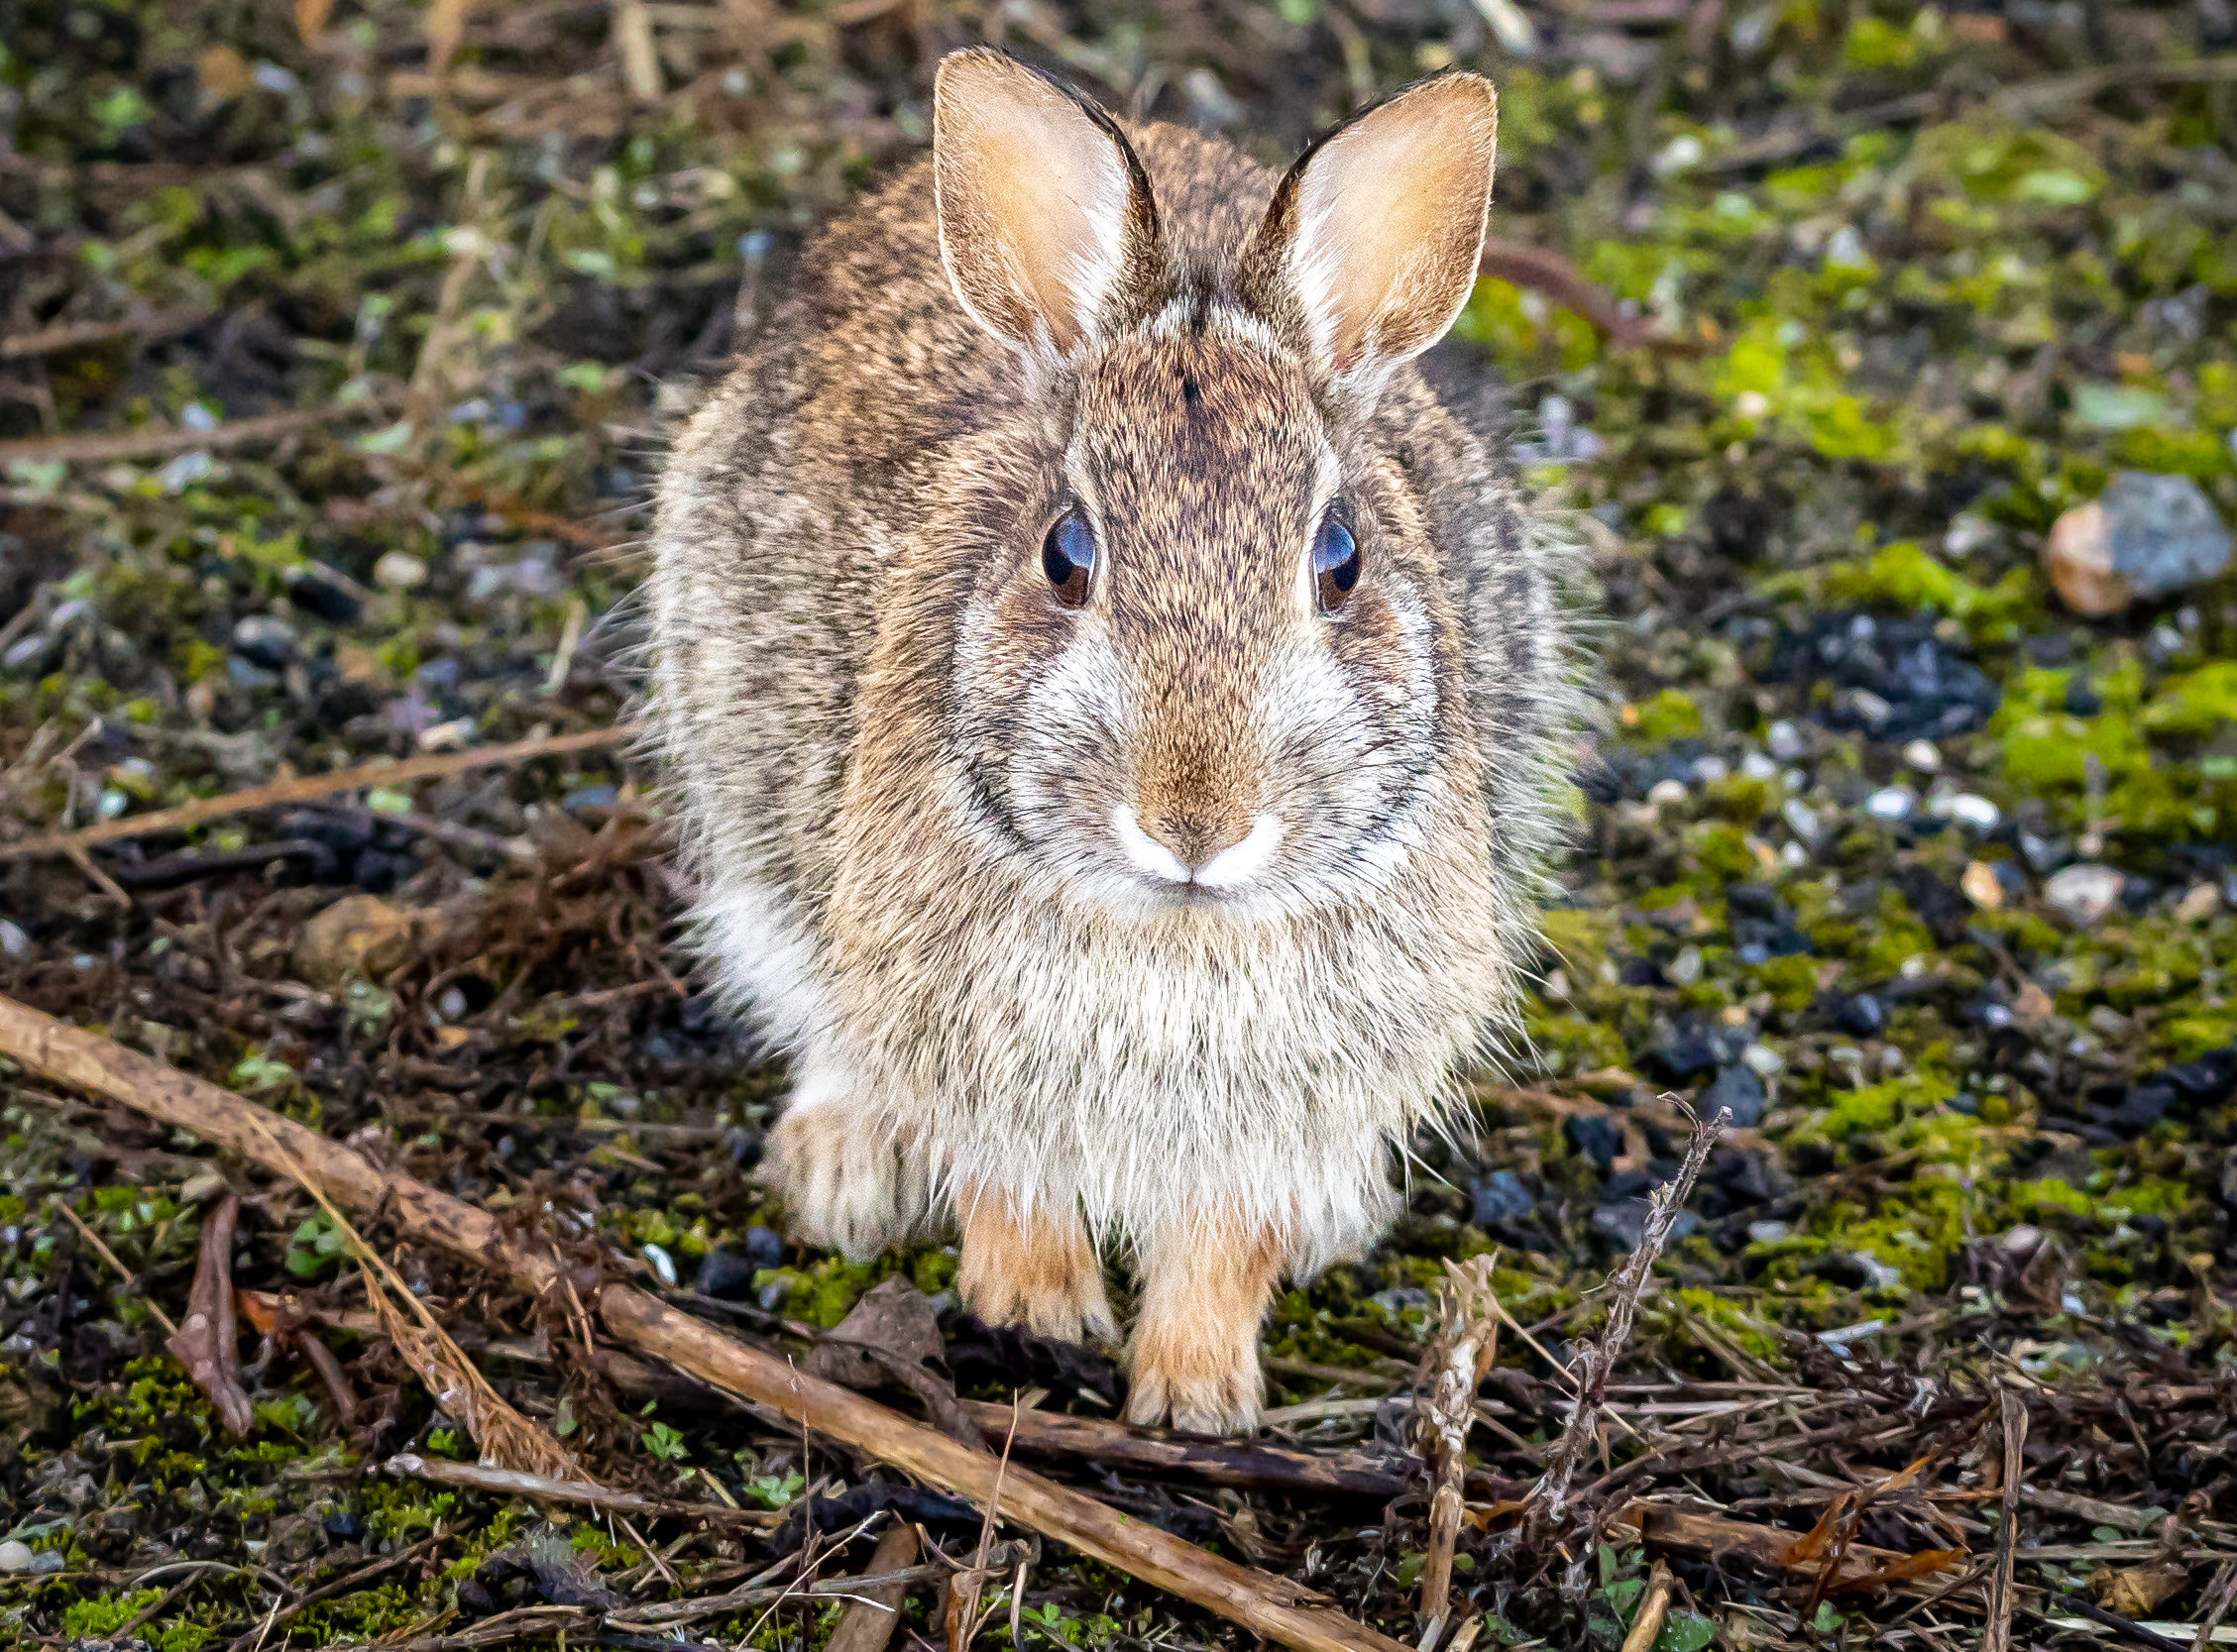 EasternCottontail.AlanEmerson